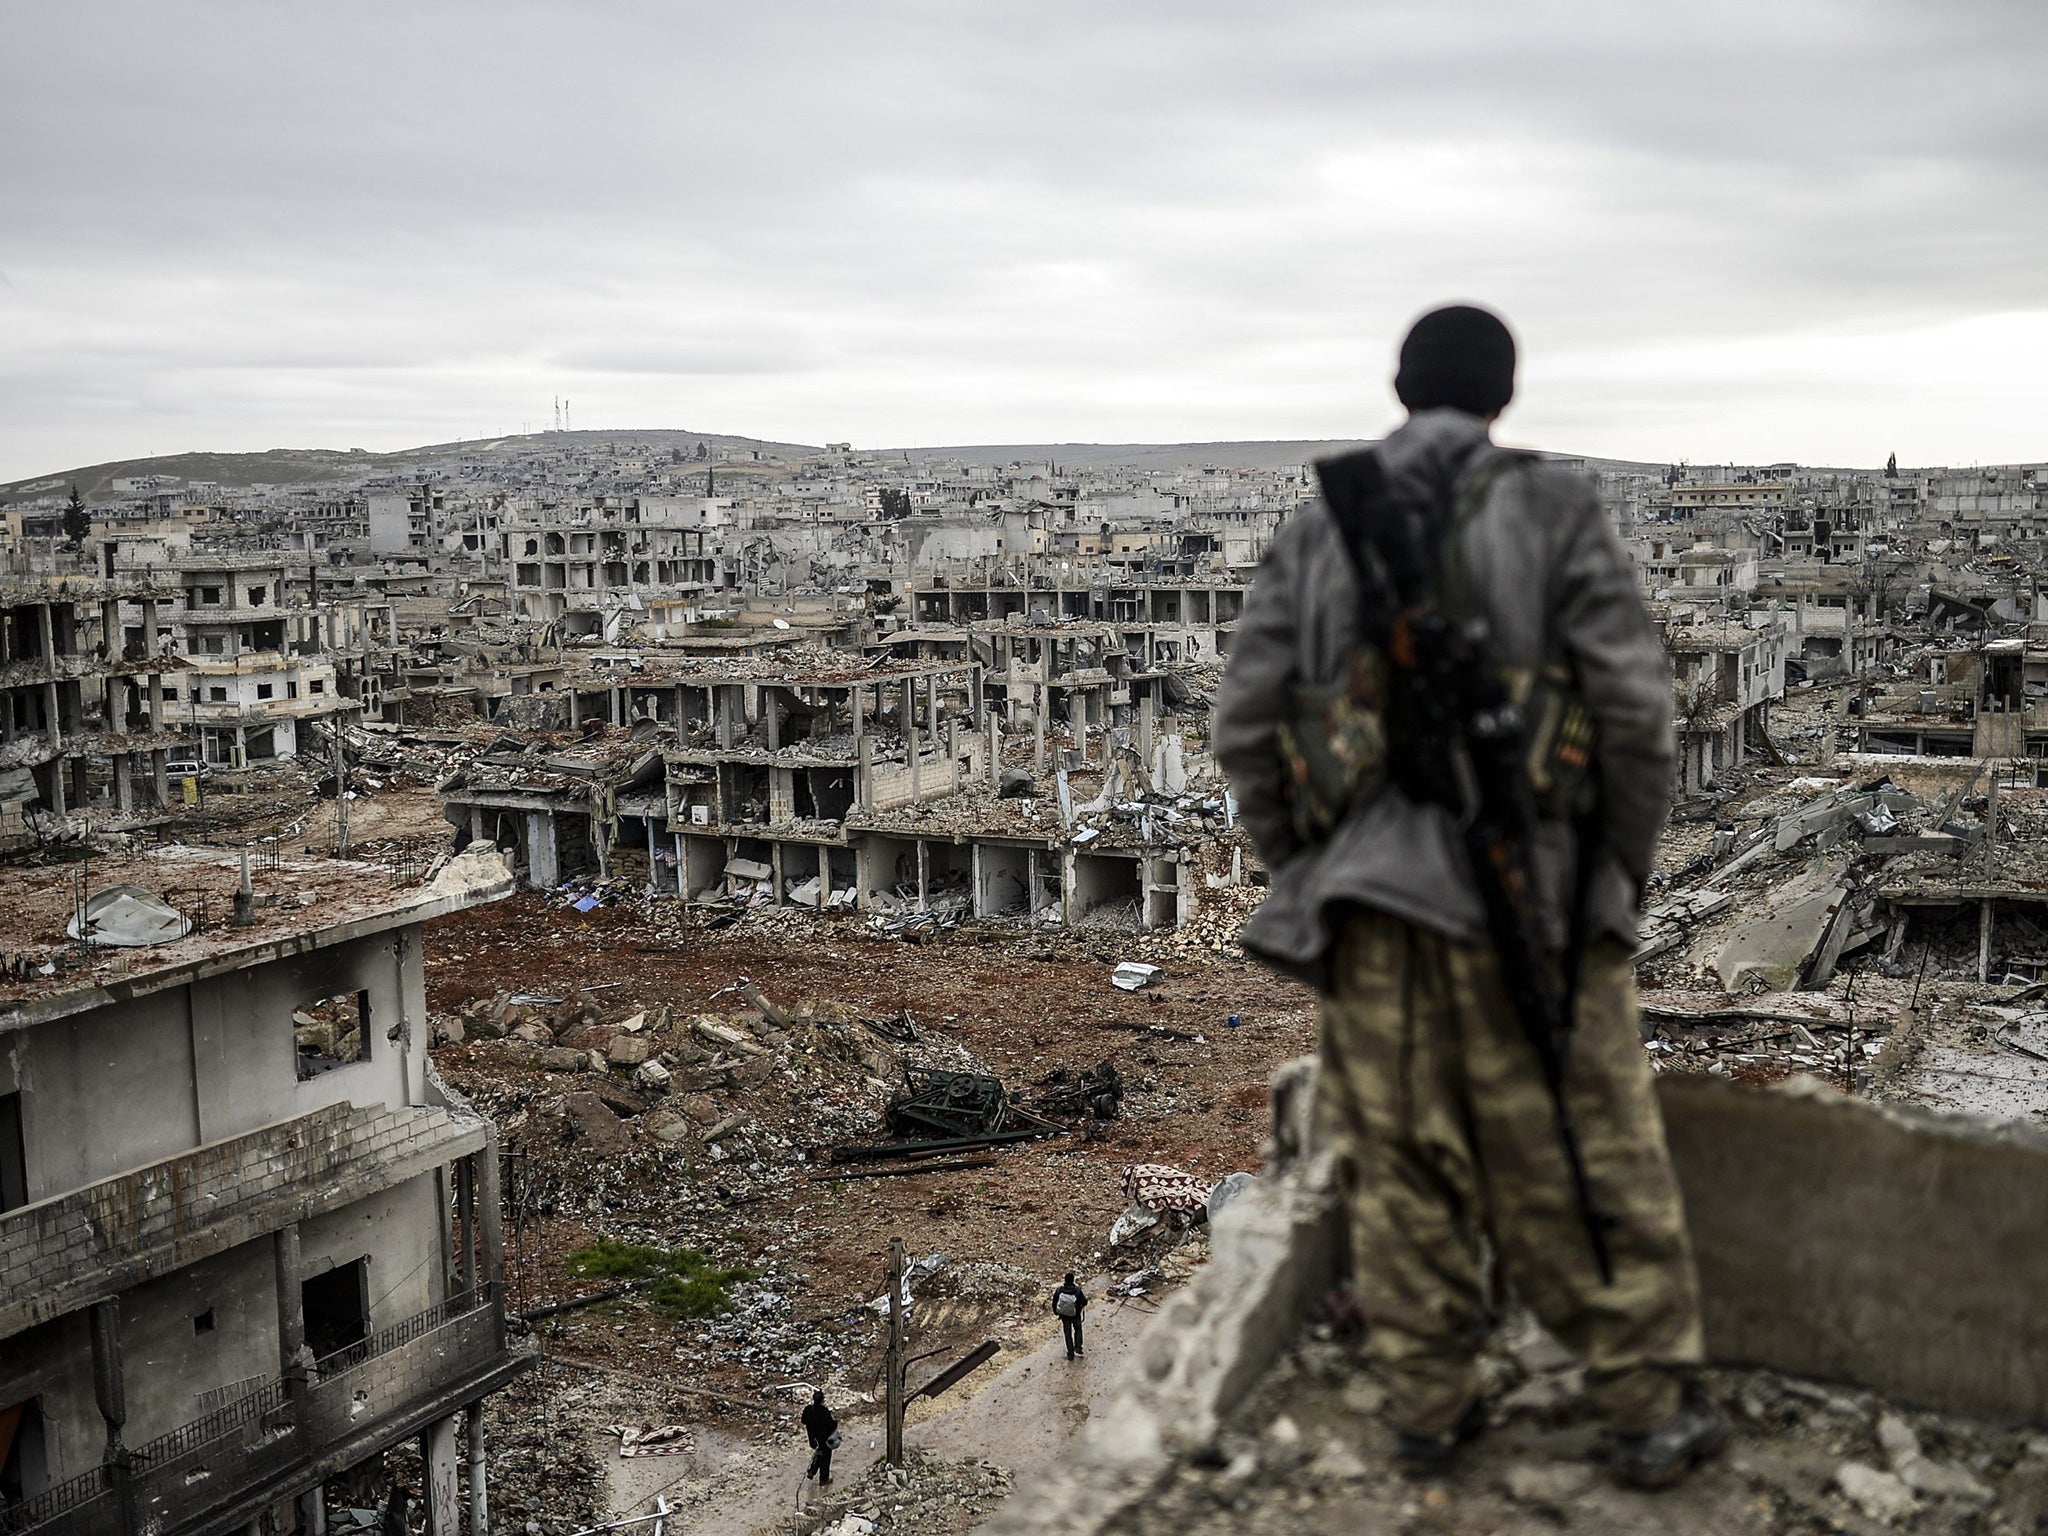 The destruction of cities such as Kobane in Syria and elsewhere, by opposing forces has made travel around the region almost impossible